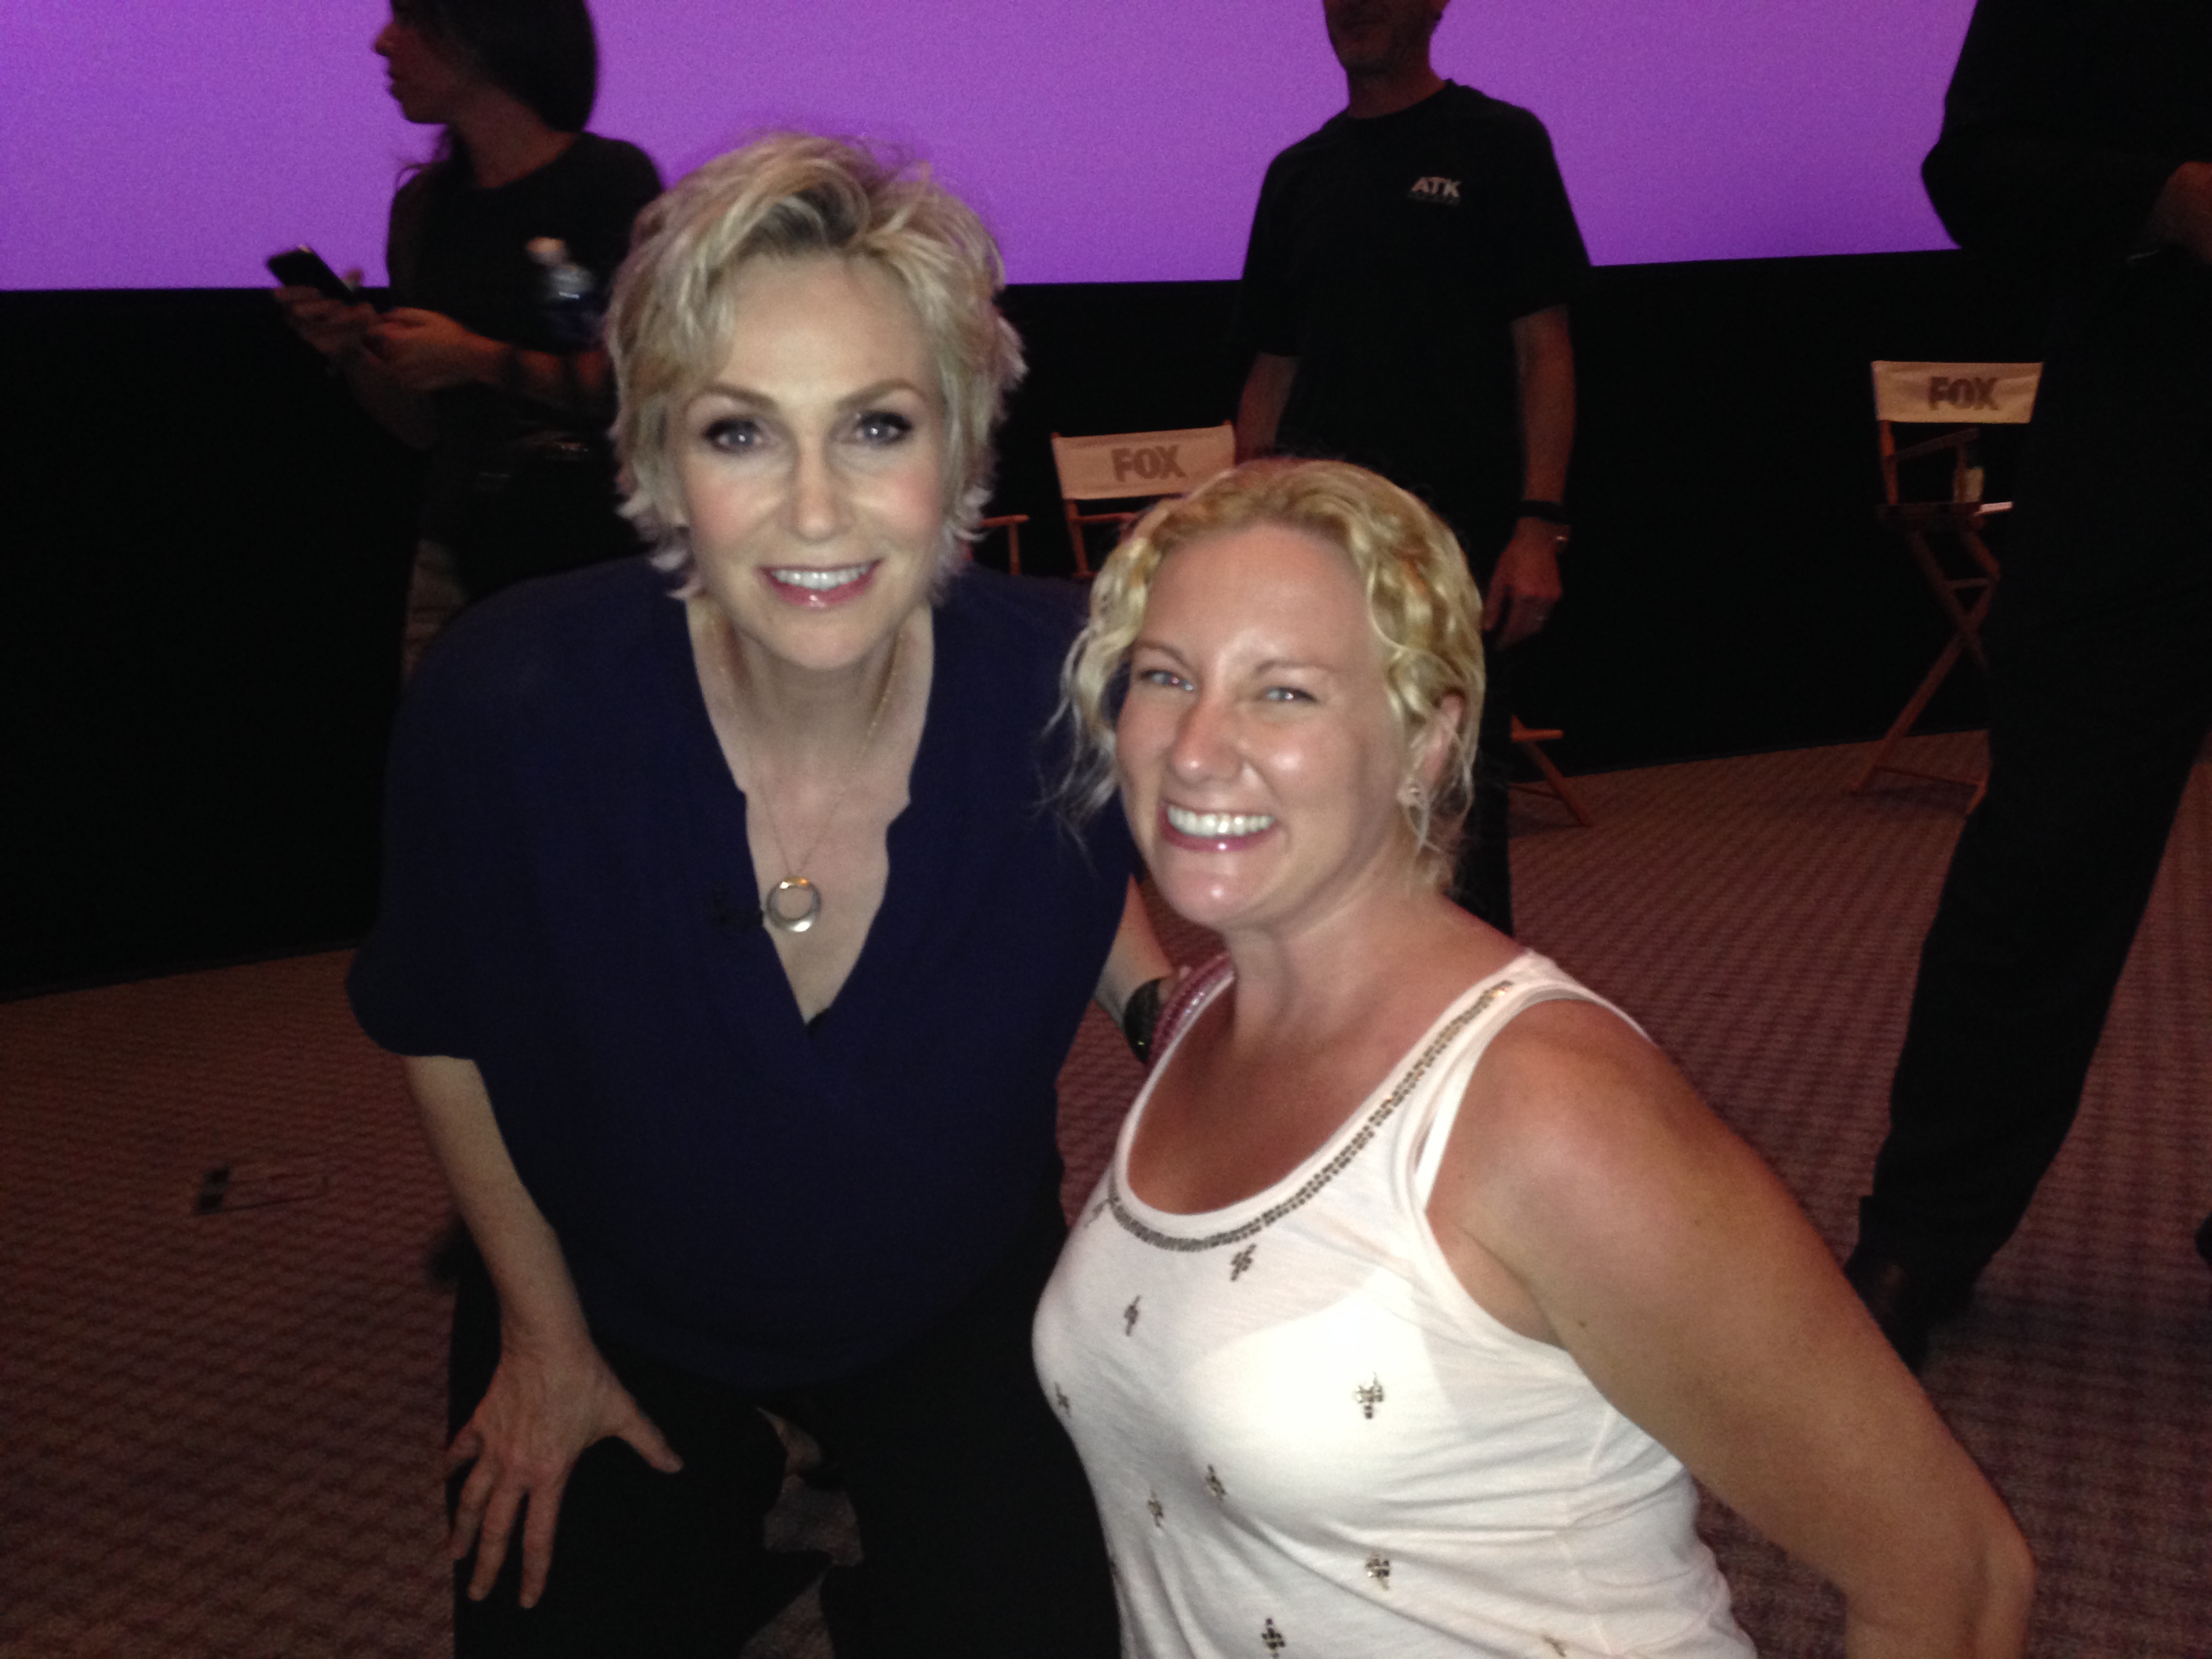 With Jane Lynch at a Fox event